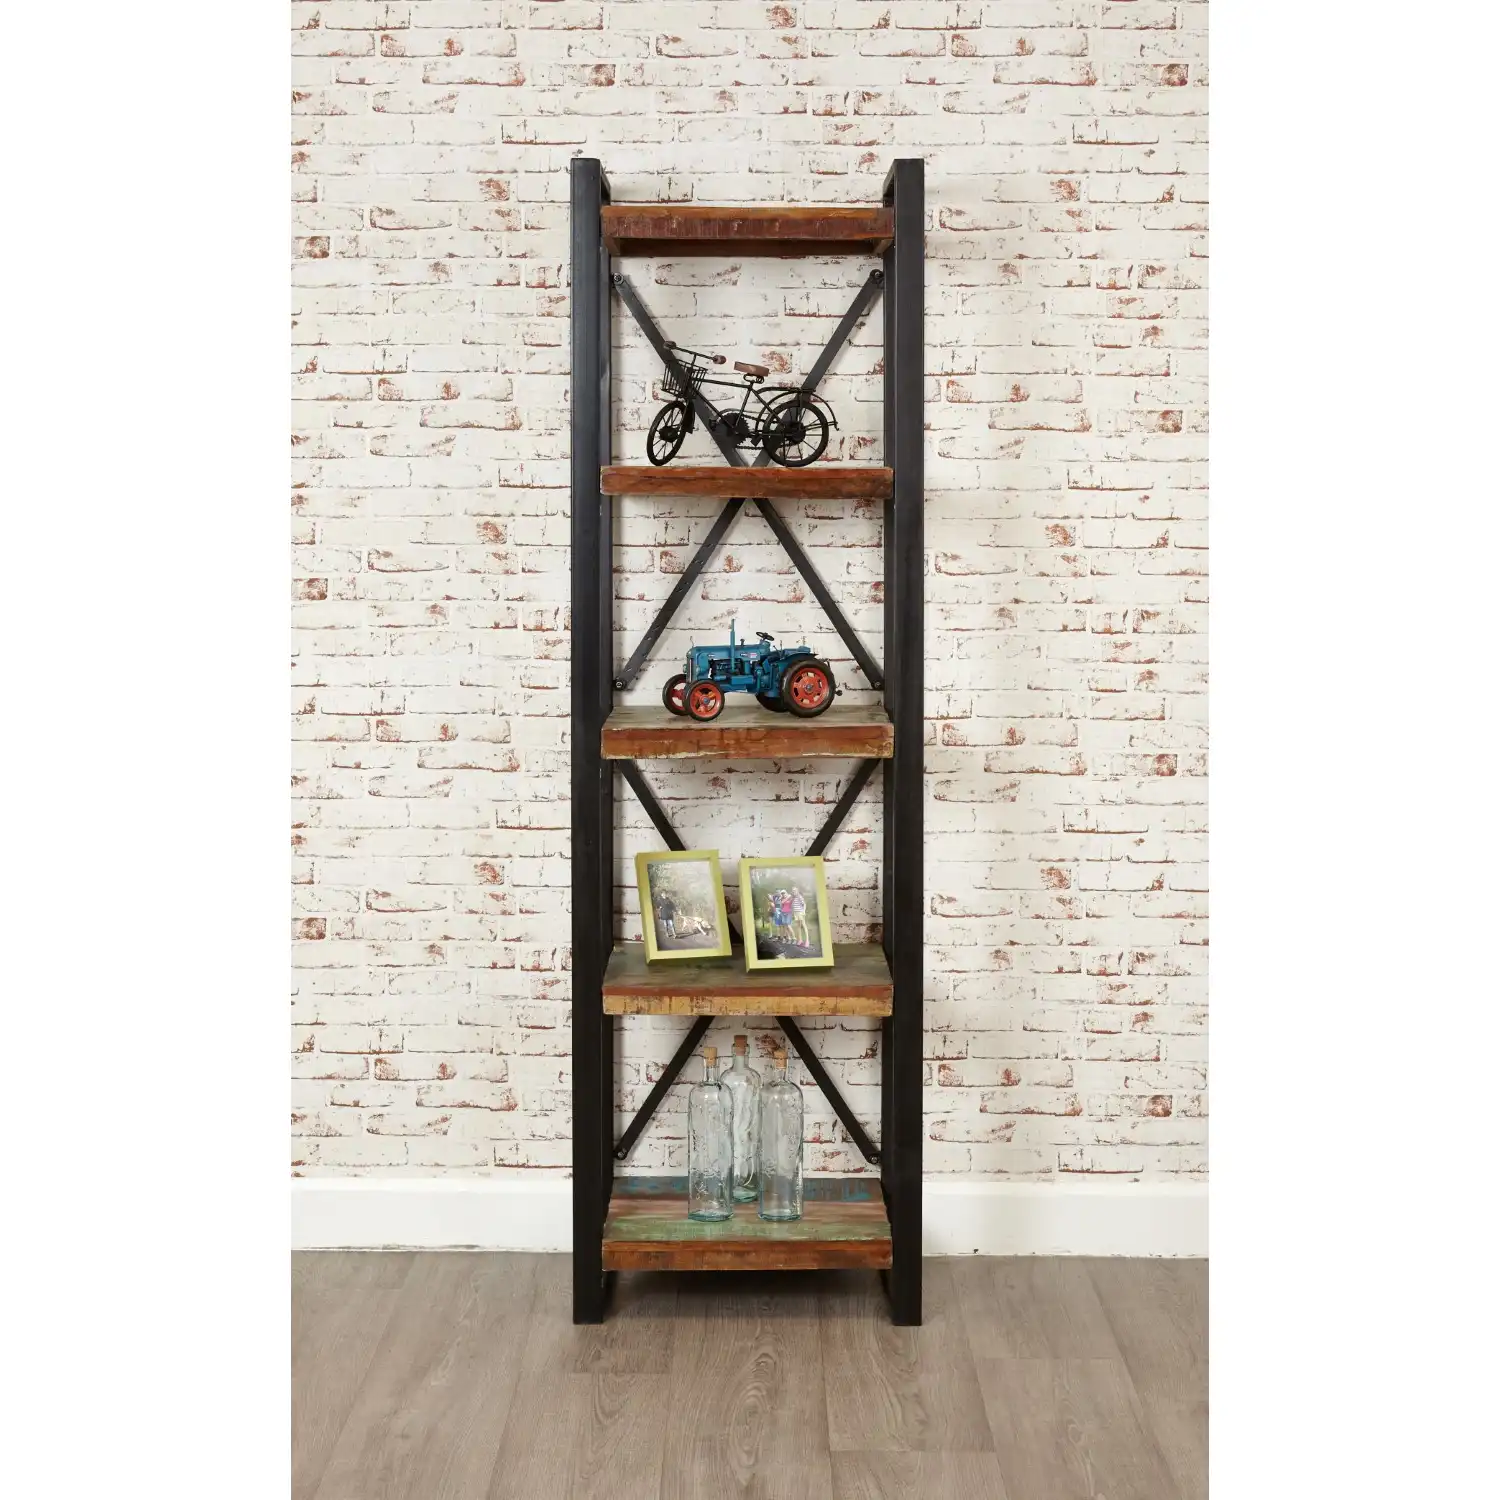 Slim Tall Narrow Alcove Bookcase Rustic Painted Metal Frame